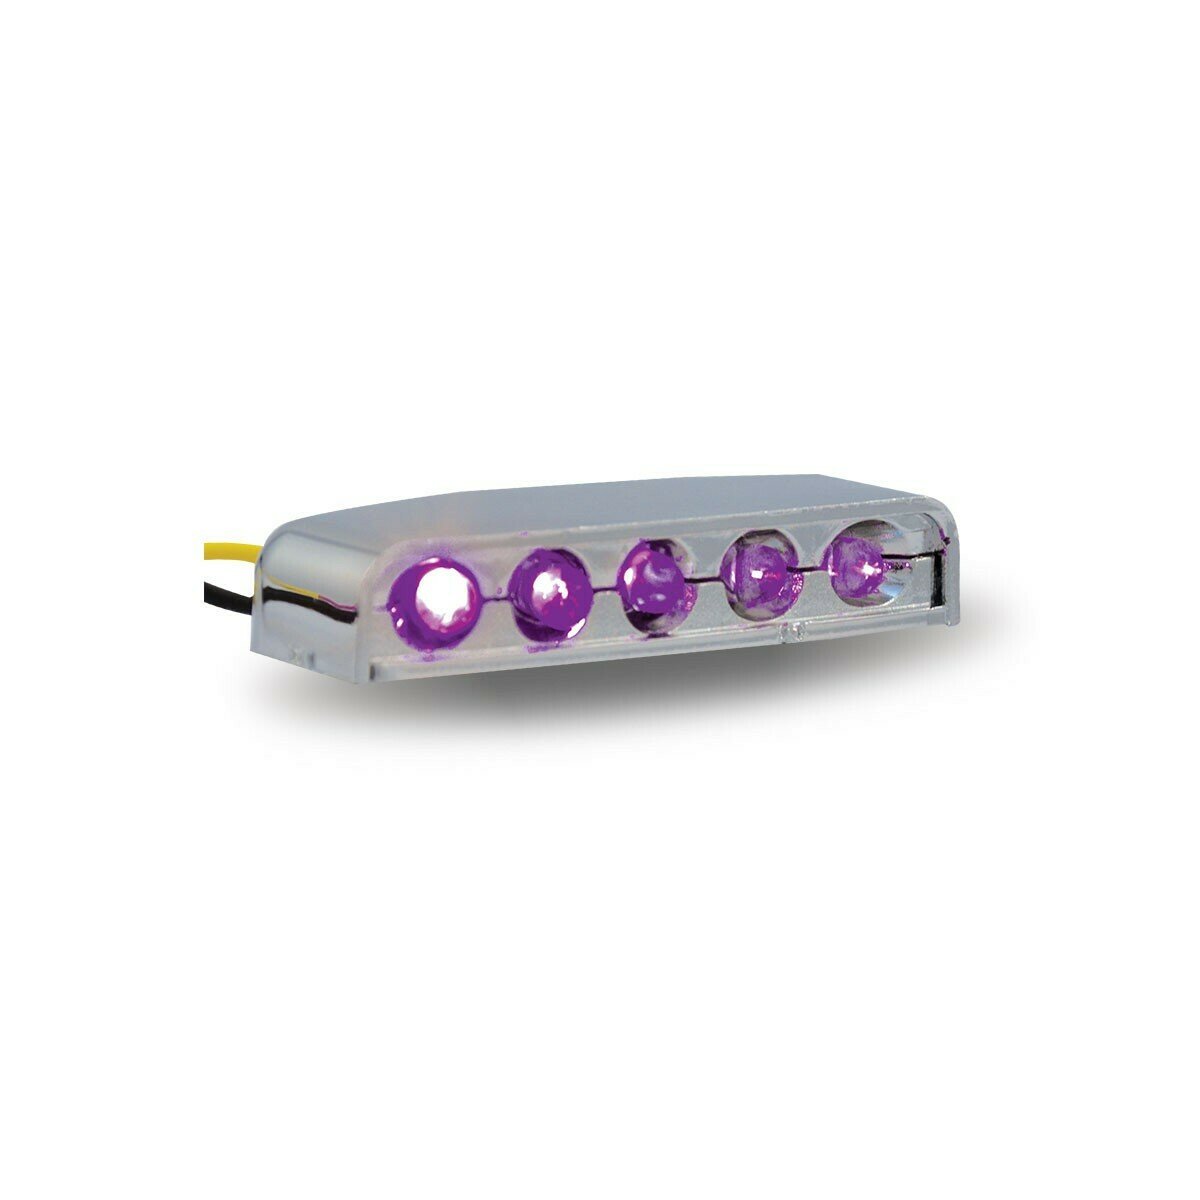 LED Lighting - Auxiliary - Purple (5 Diodes)